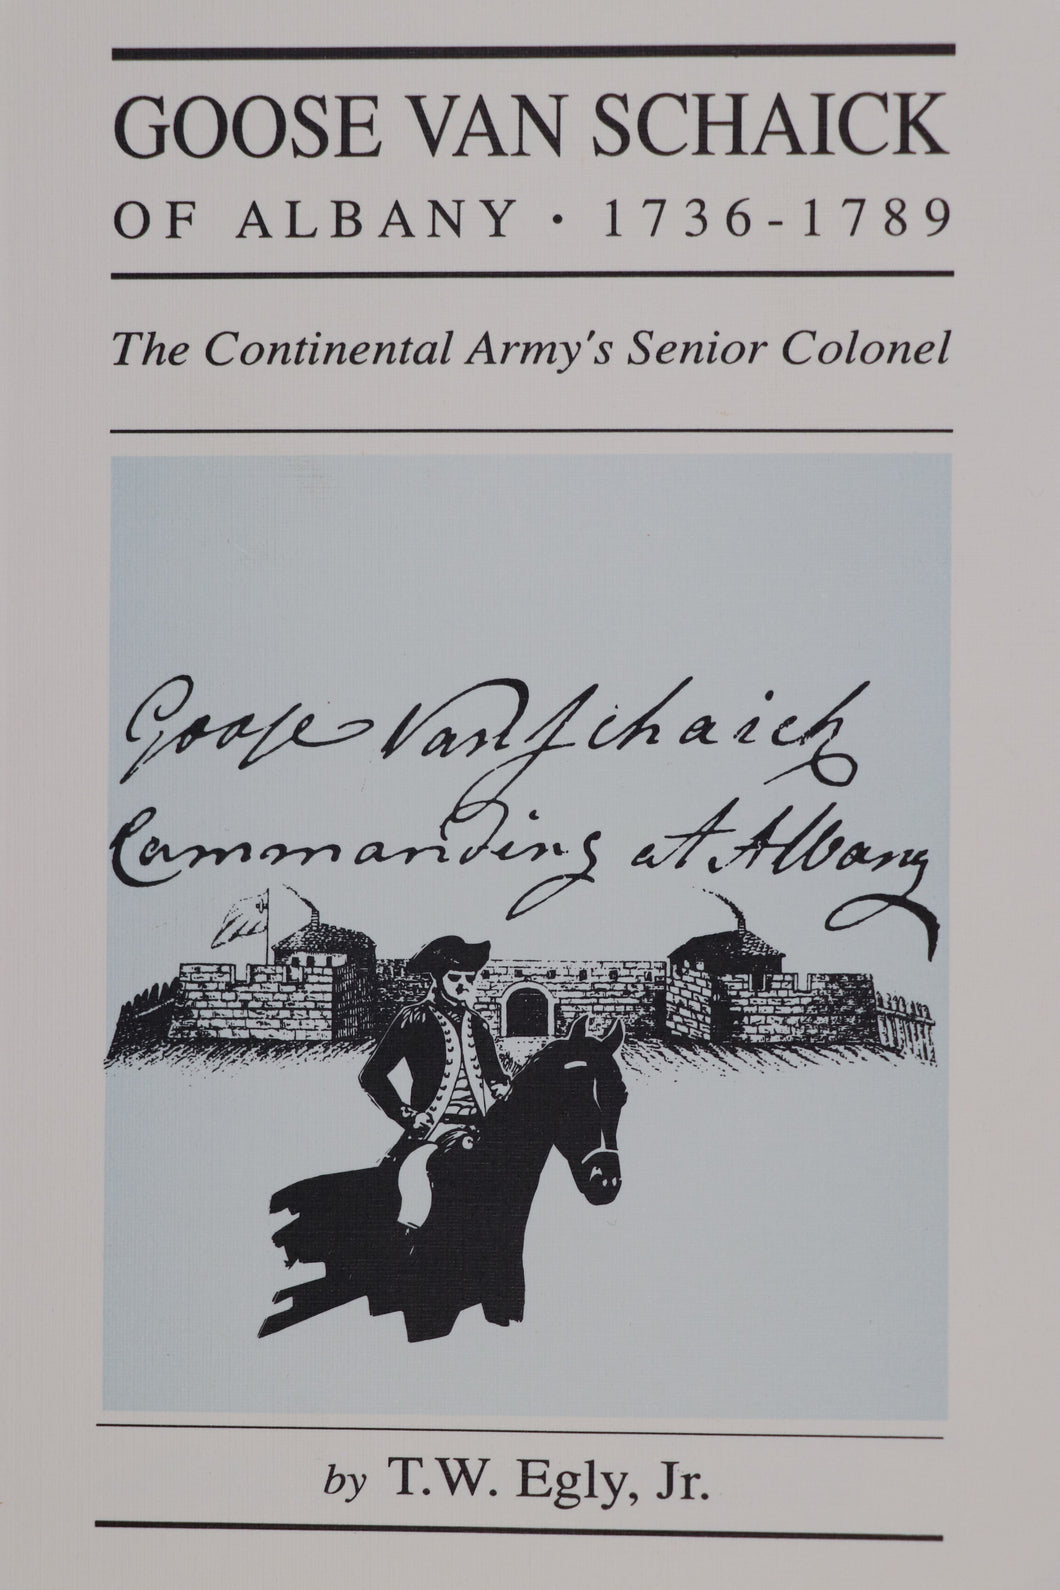 Goose Van Schaick of Albany 1736-1789: The Continental Army's Senior Colonel